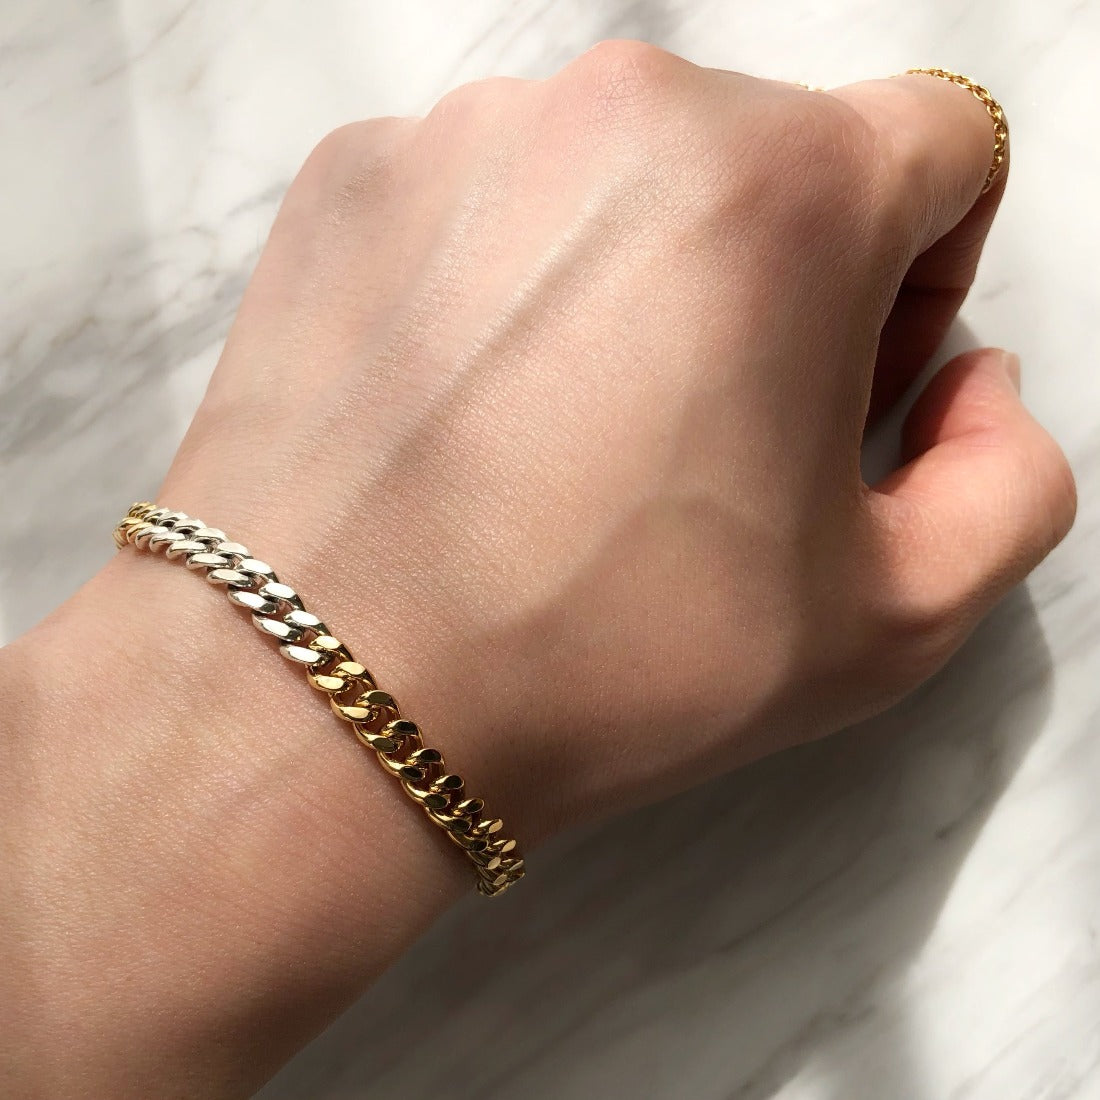 18K　Silver　Combination　コンビネーション　Curb Chain　カーブチェーン　Bracelet　ブレスレット　着用写真